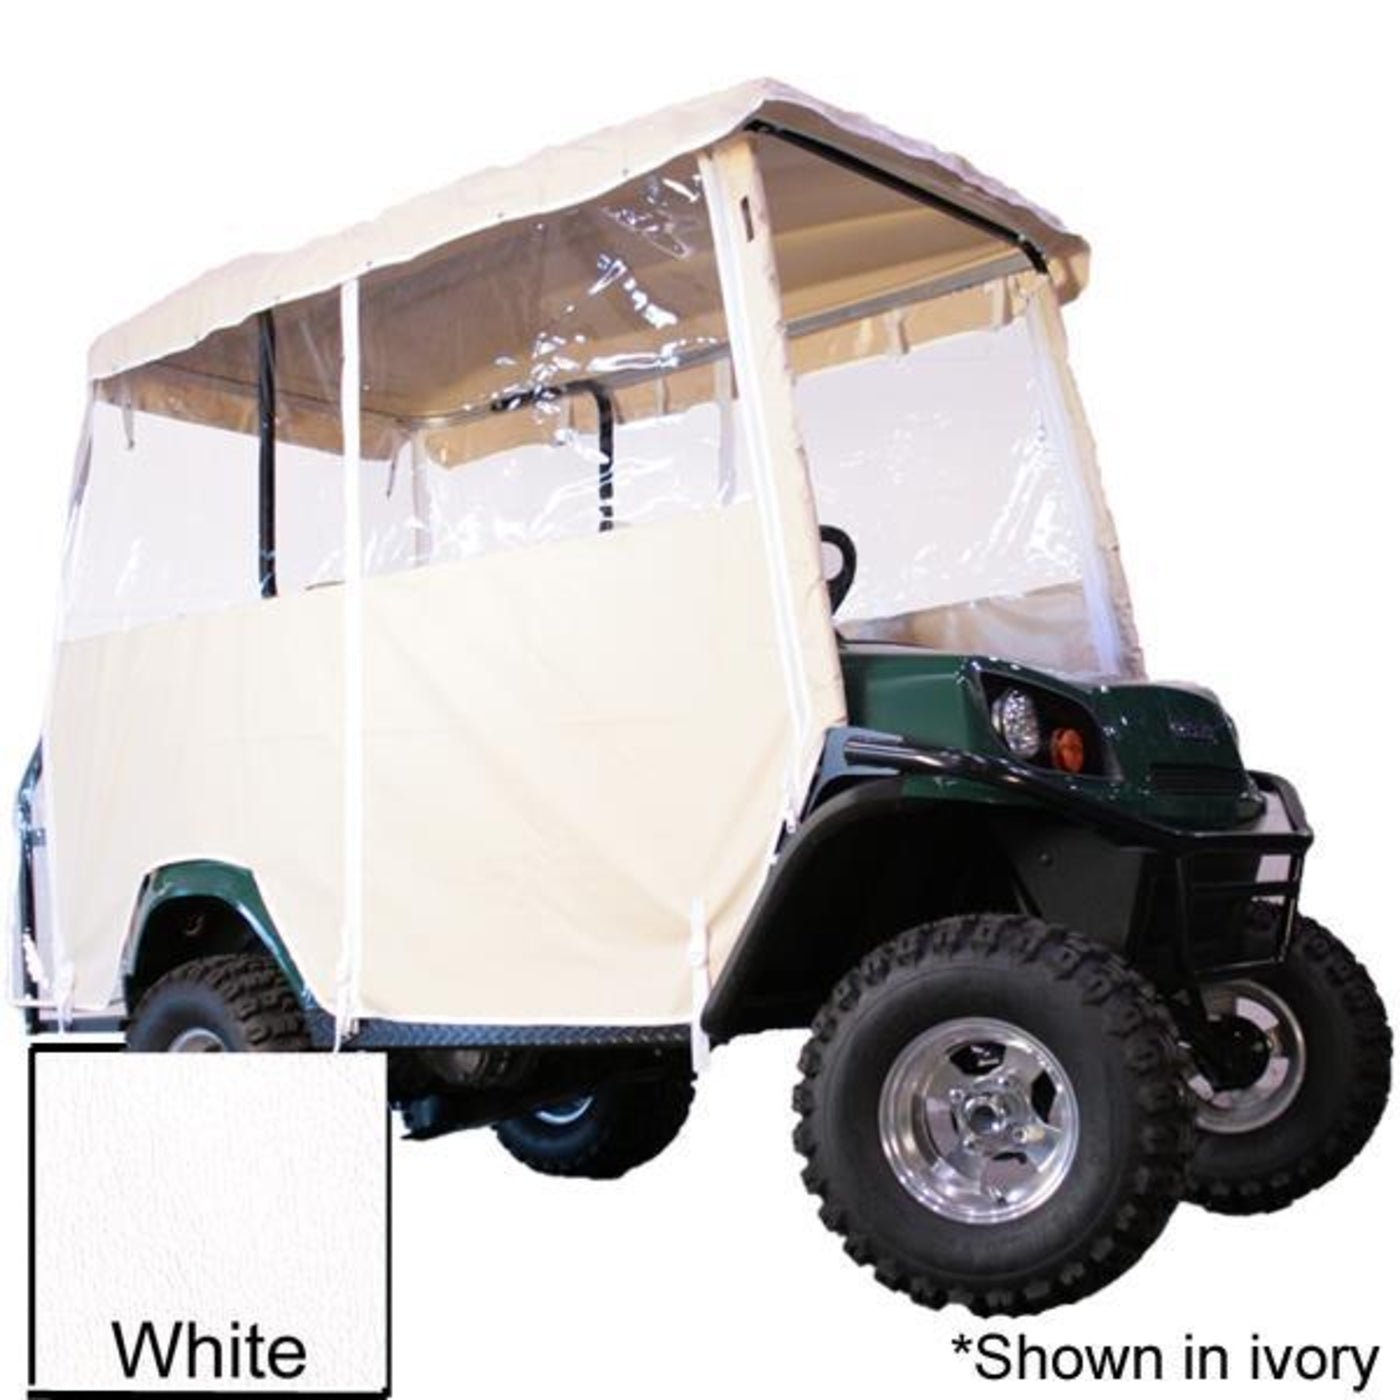 White 4-Passenger Over-The-Top Vinyl Enclosure For Club Car Villager w/80" Stretch/Eagle Top